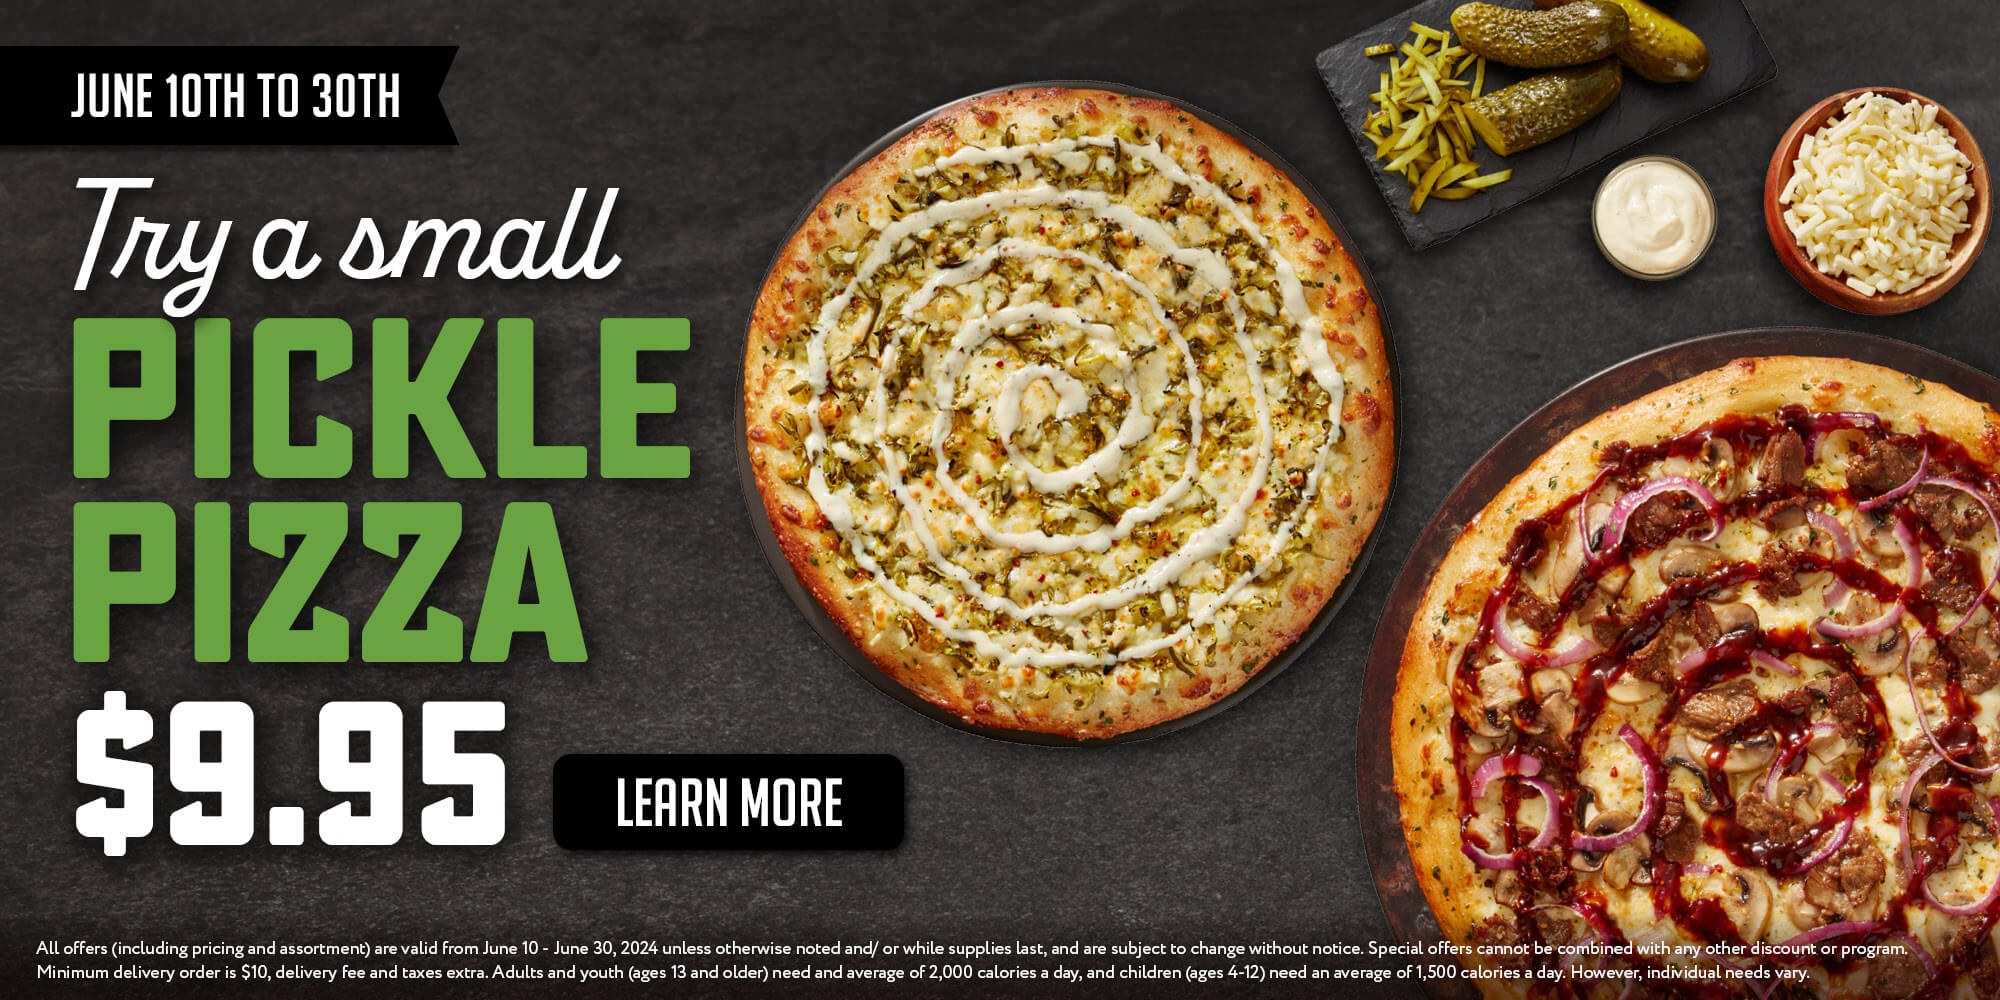 Small Pickle Pizza for $9.95